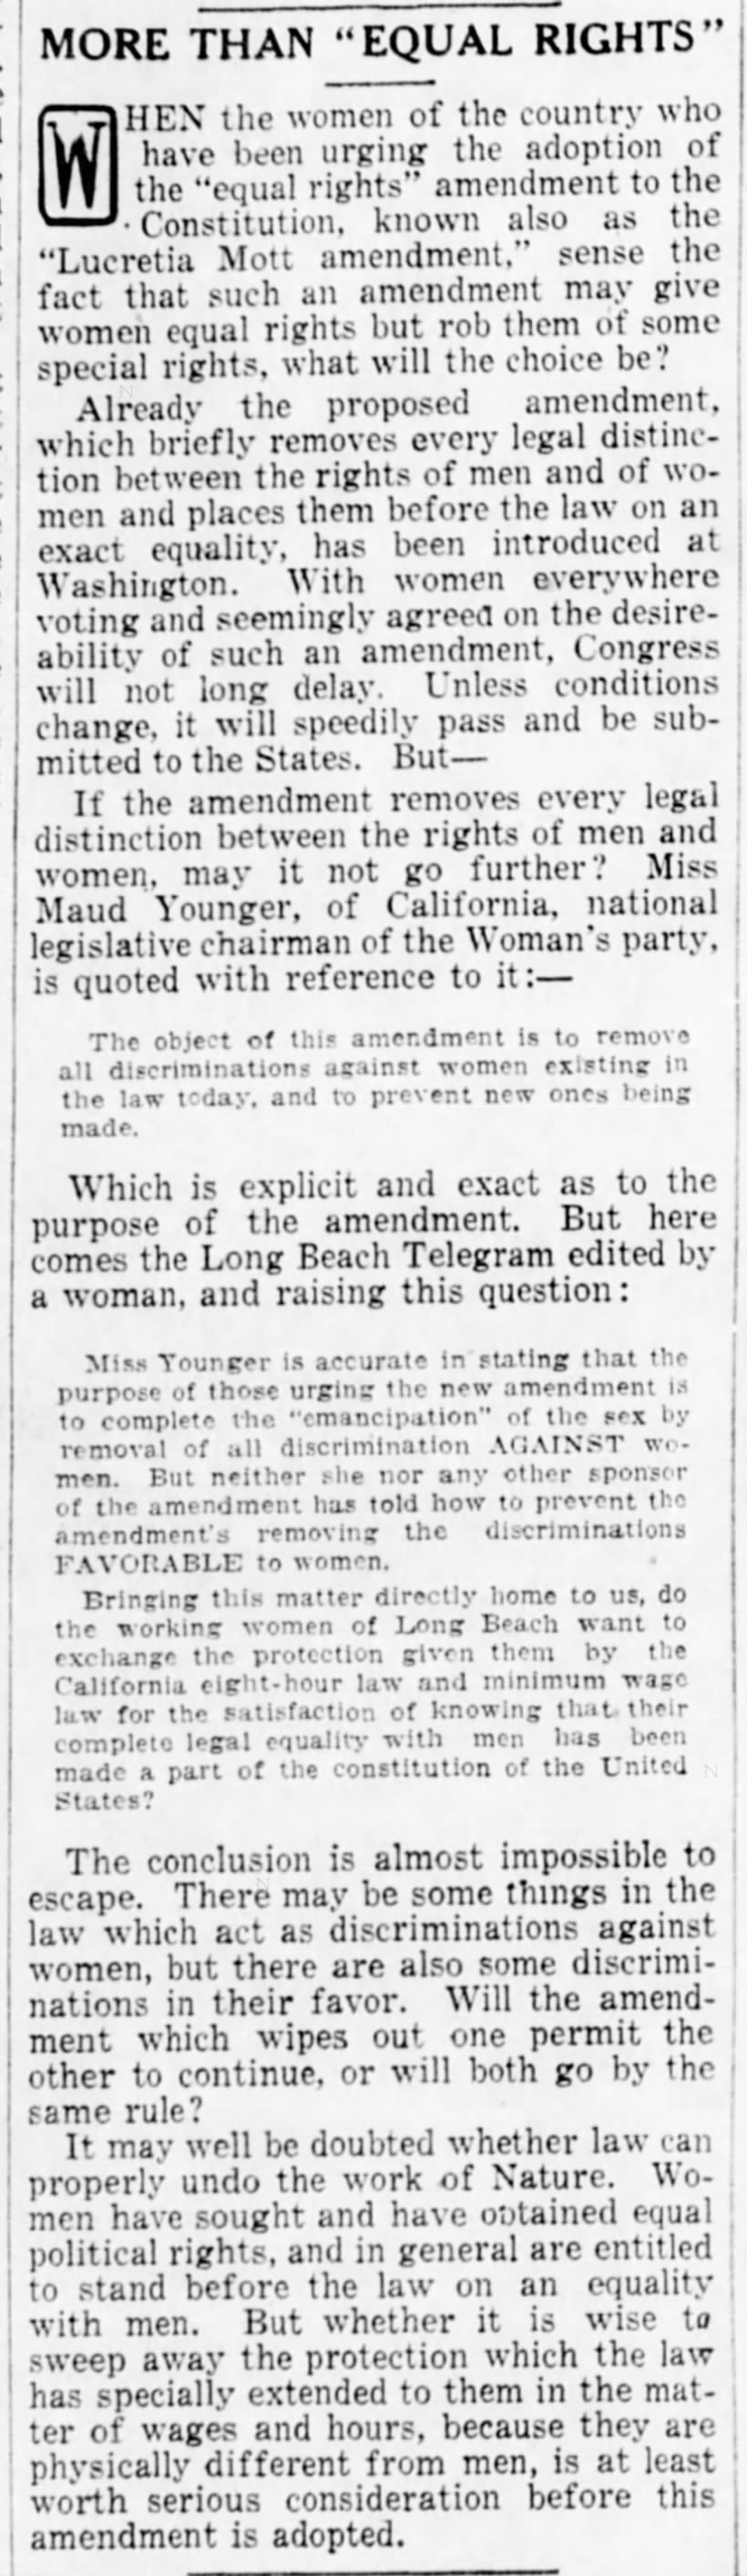 1923 editorial says ERA "may give women equal rights but rob them of some special rights"